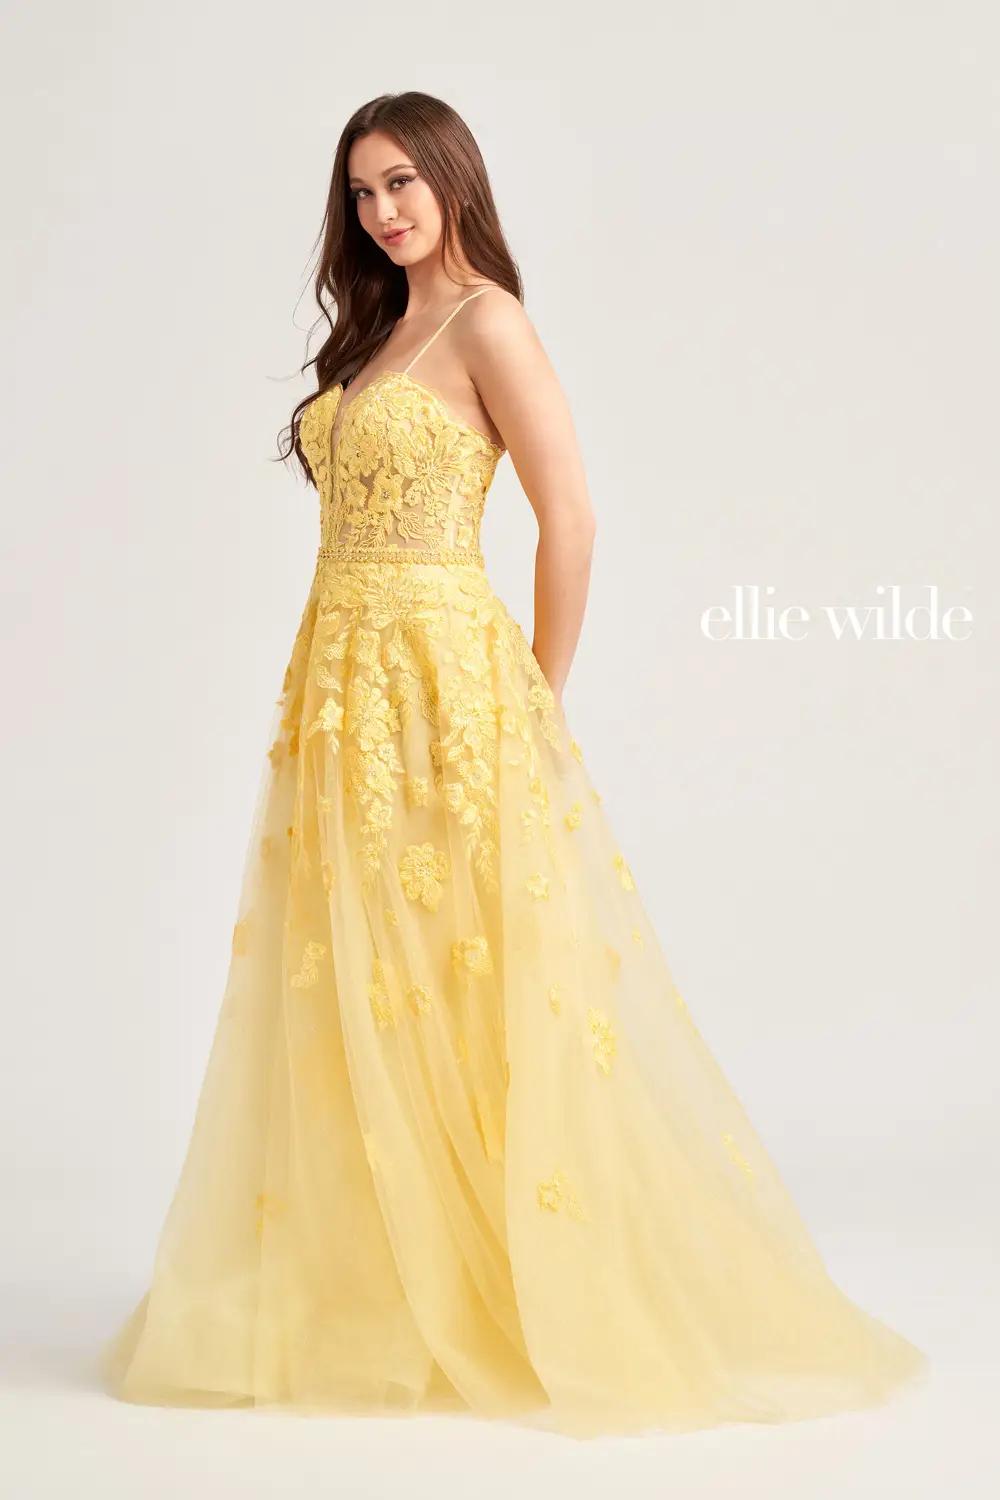 Zesty yellow ruffled ballgown wedding/prom dress with tiered skirt or  feathers - various styles